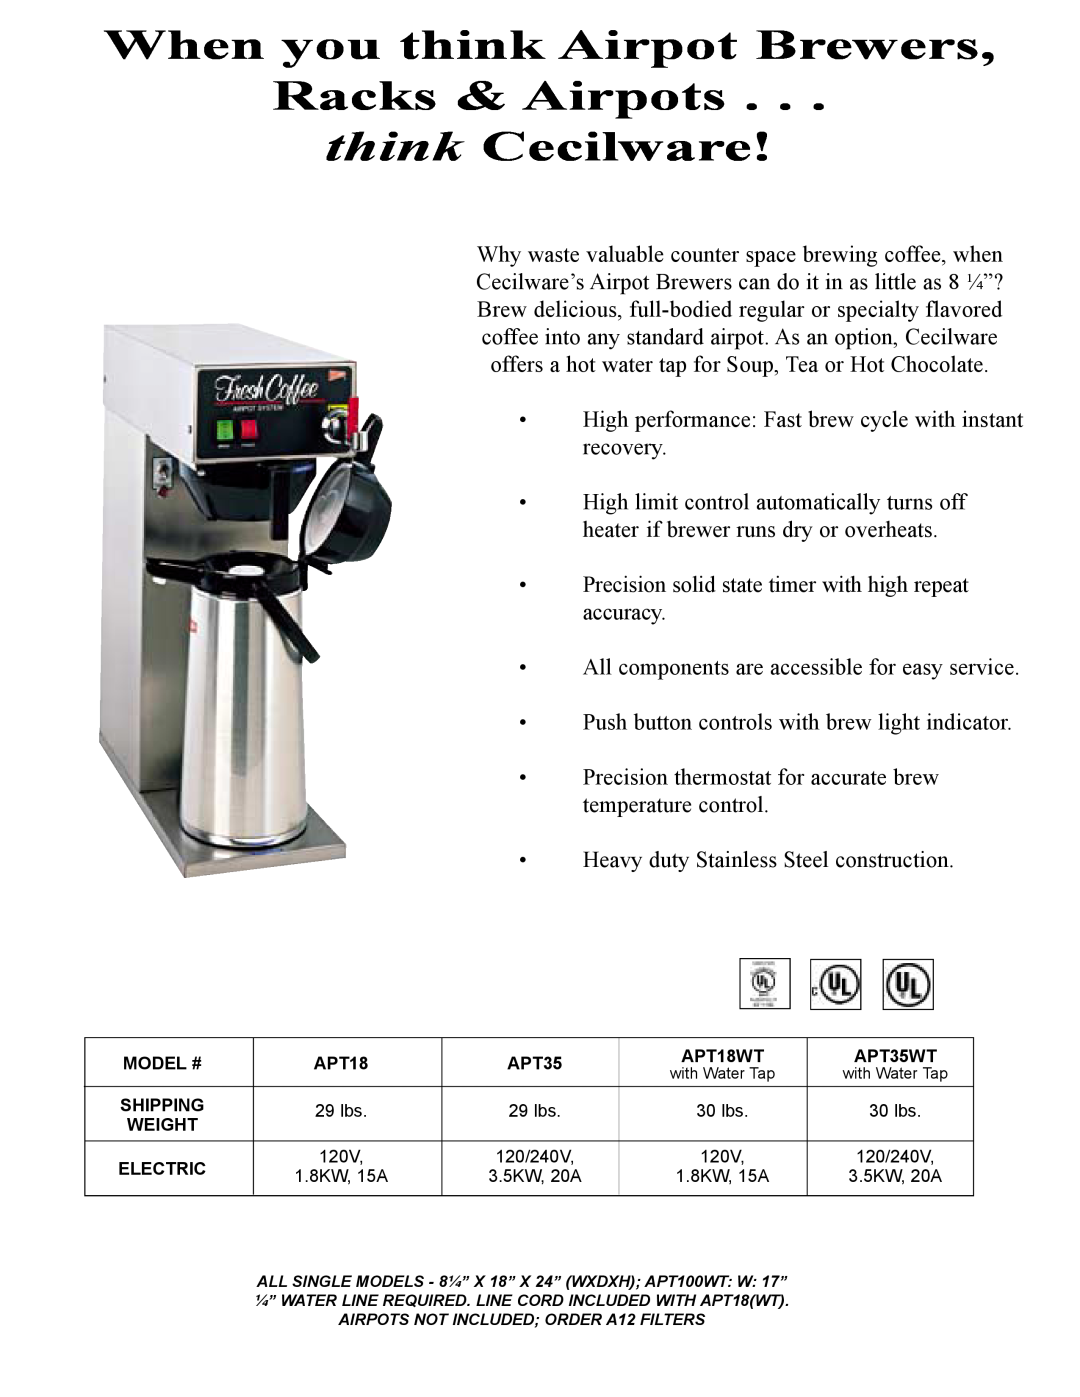 Cecilware V278A manual When you think Airpot Brewers Racks & Airpots think Cecilware 